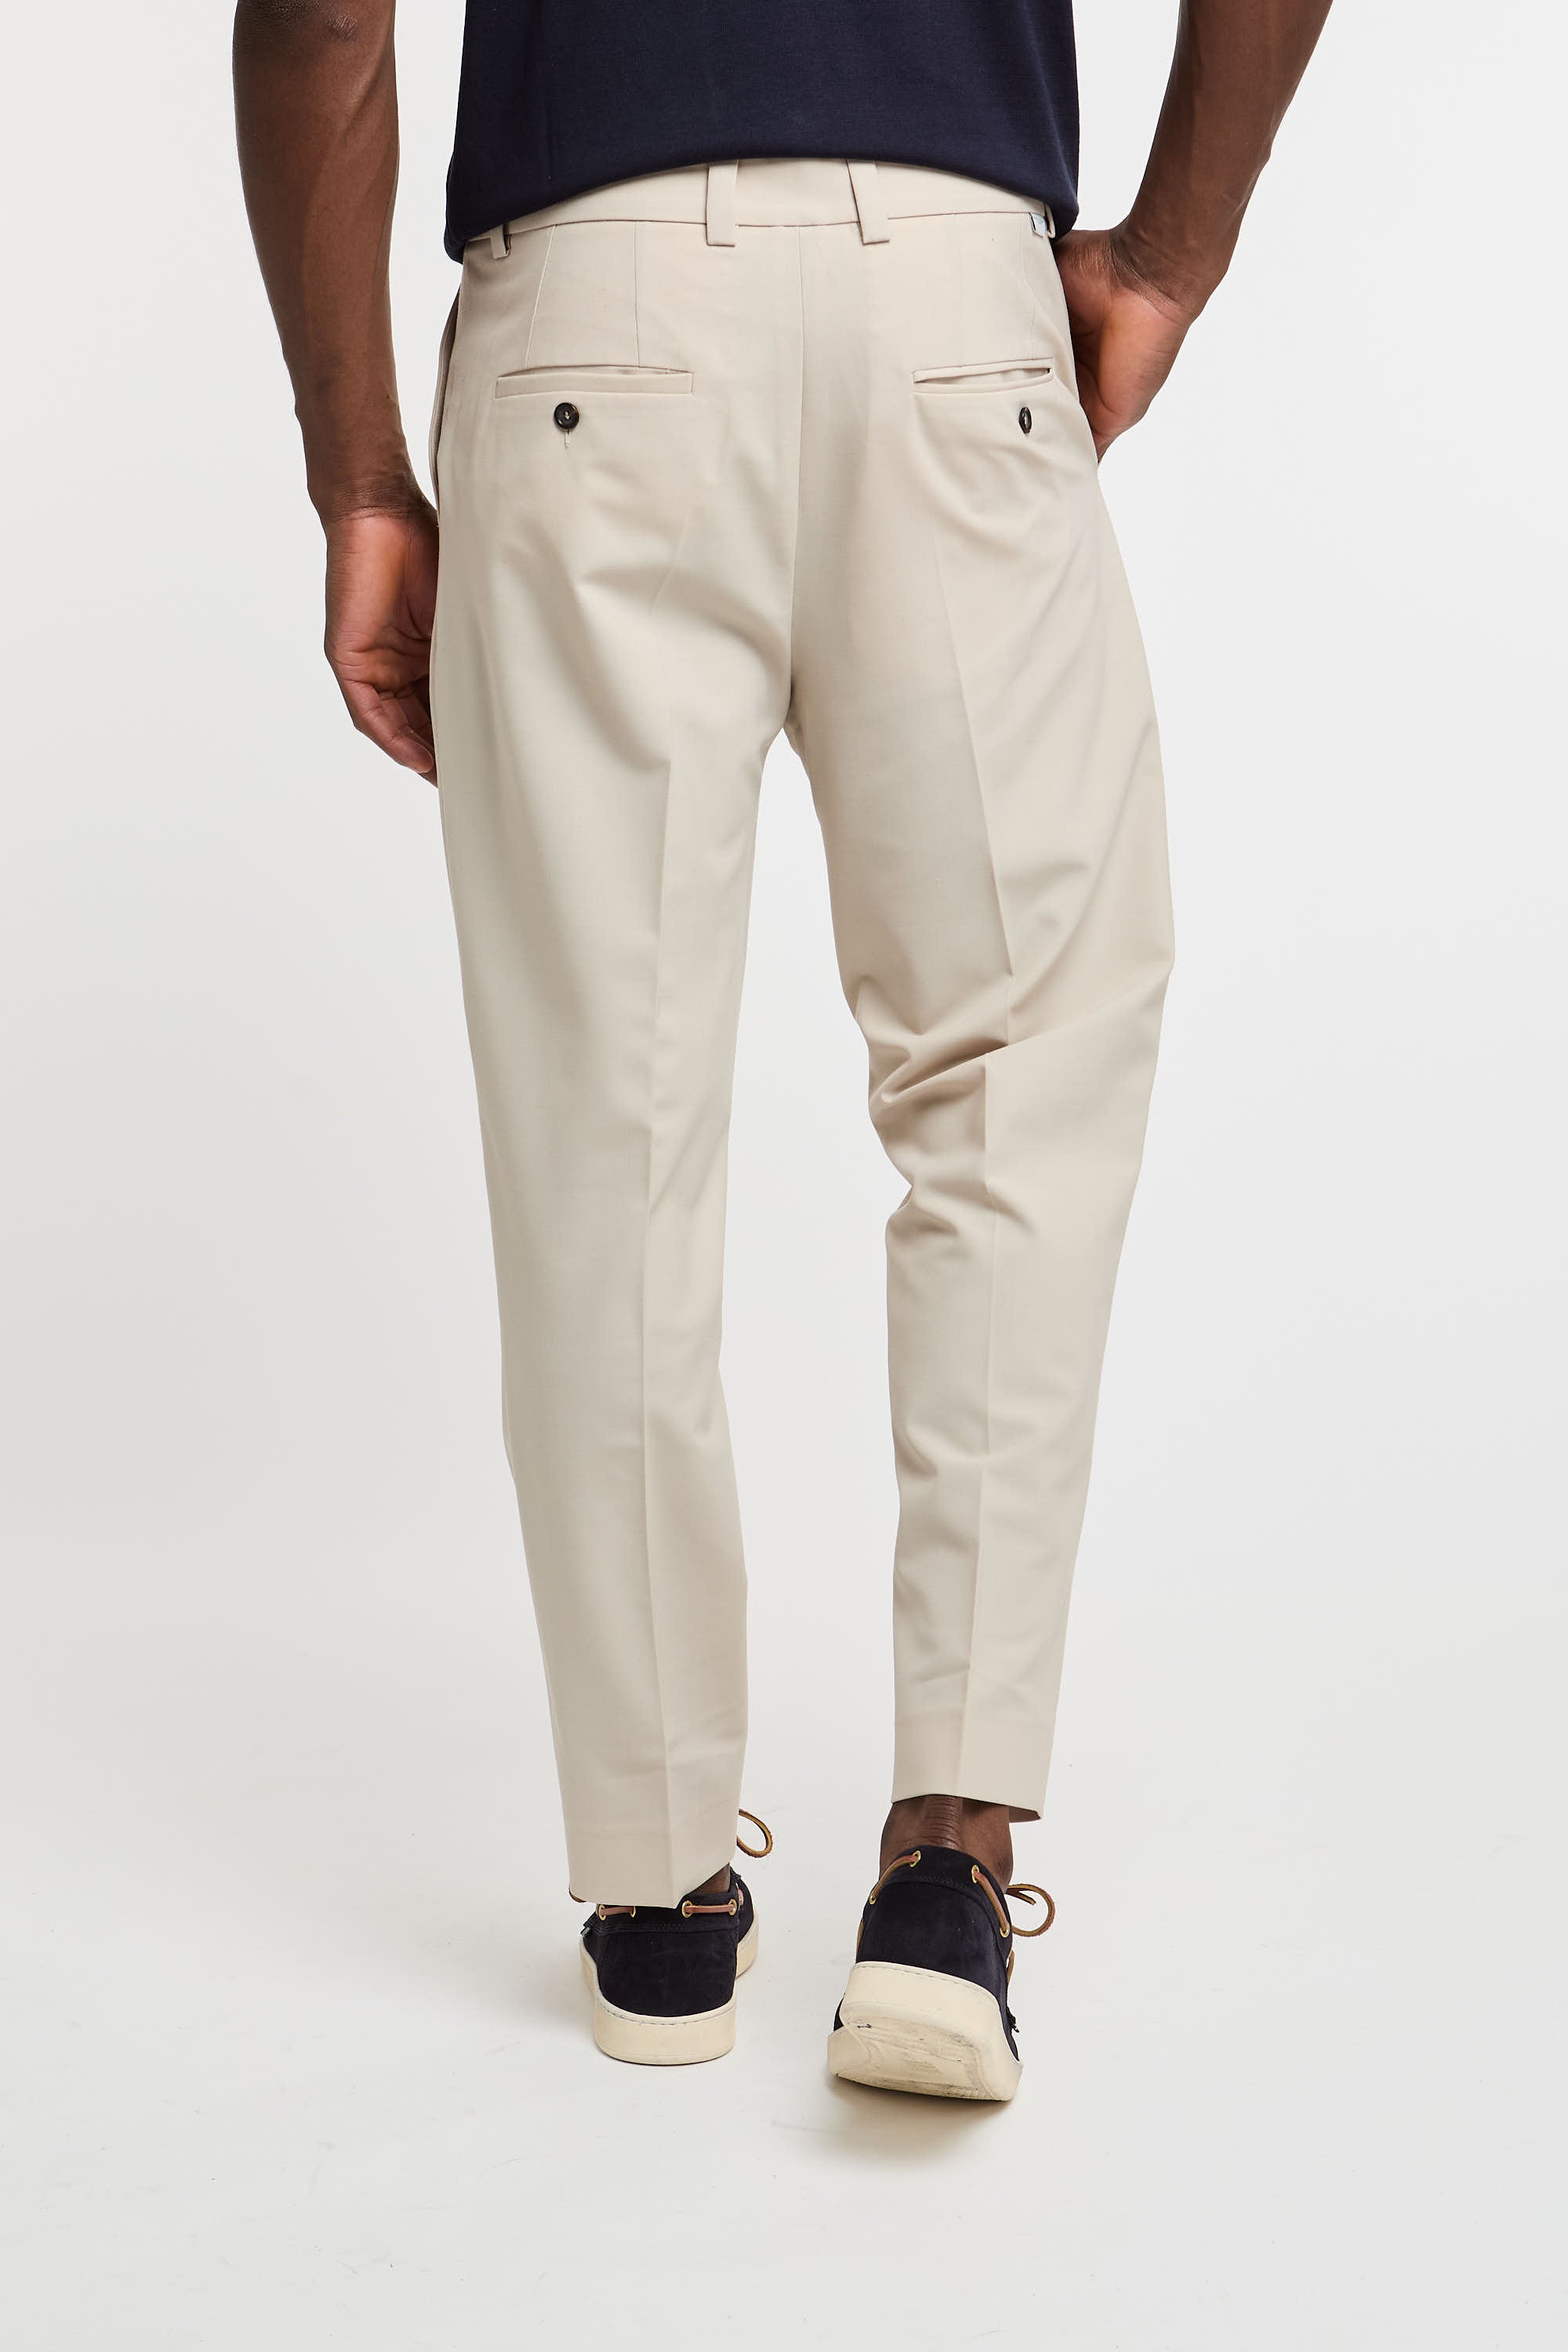 Paolo Pecora Beige Wool/Polyester Mix Trousers-4